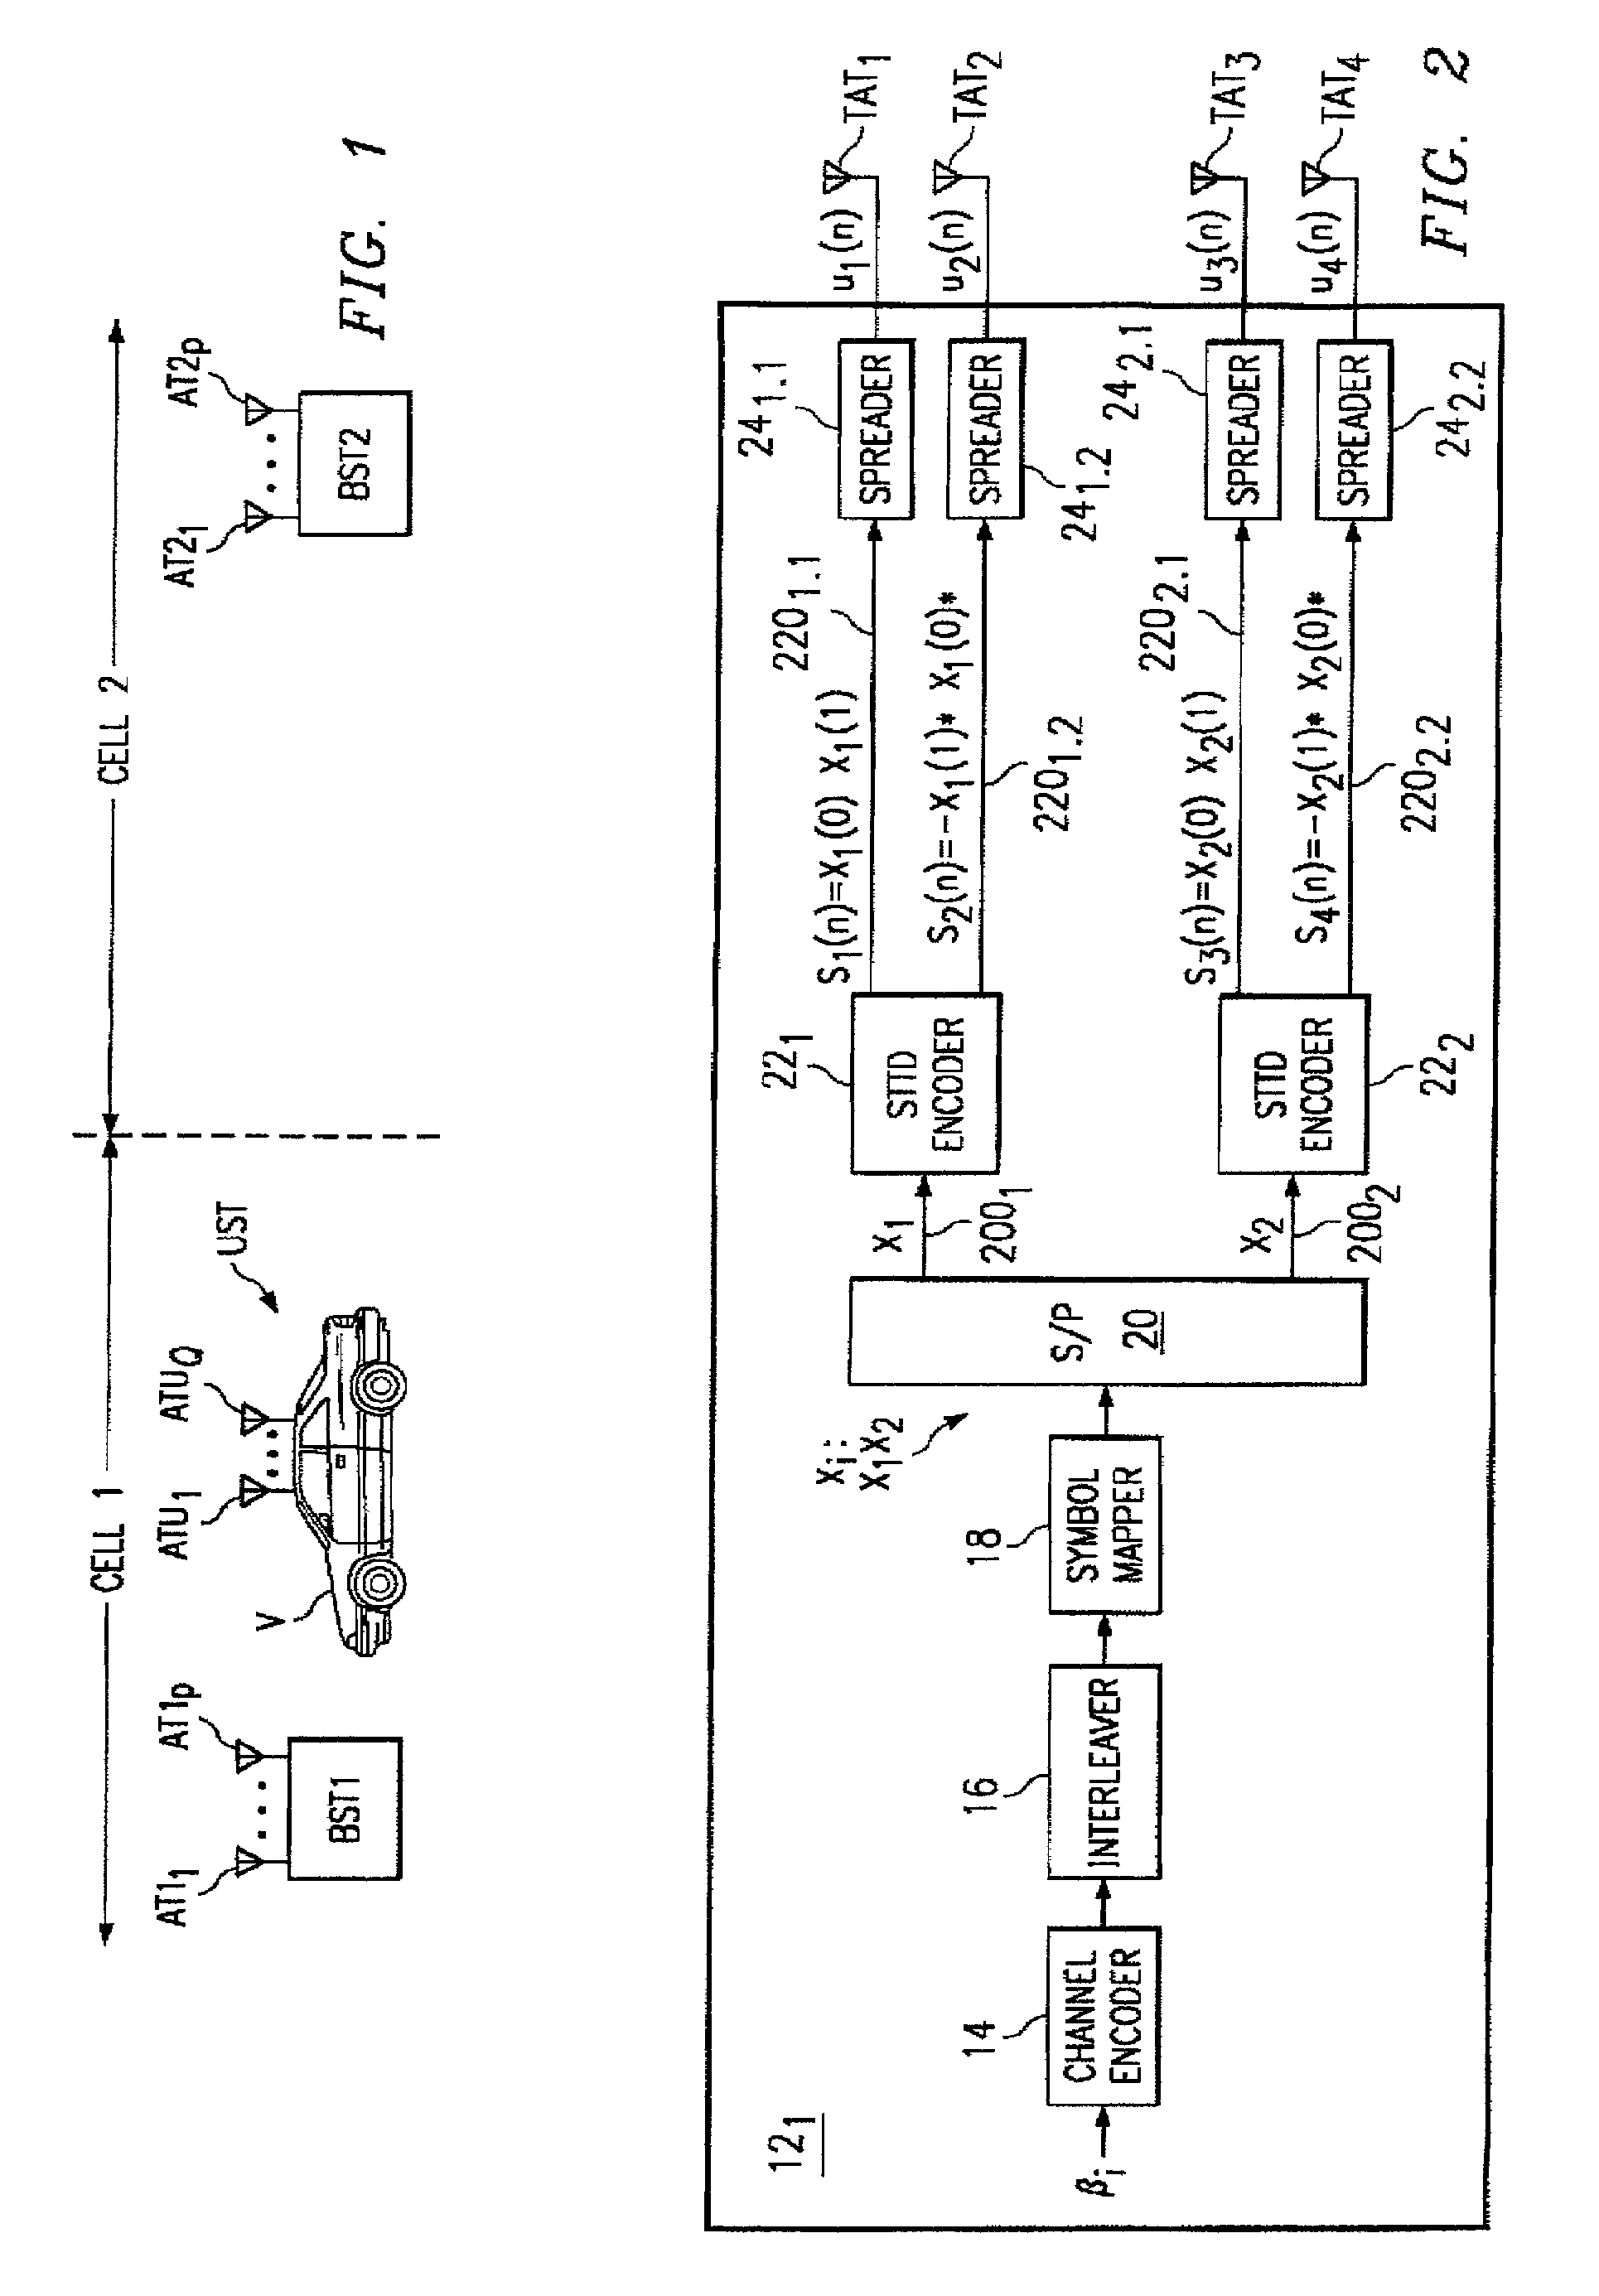 Space time encoded wireless communication system with multipath resolution receivers